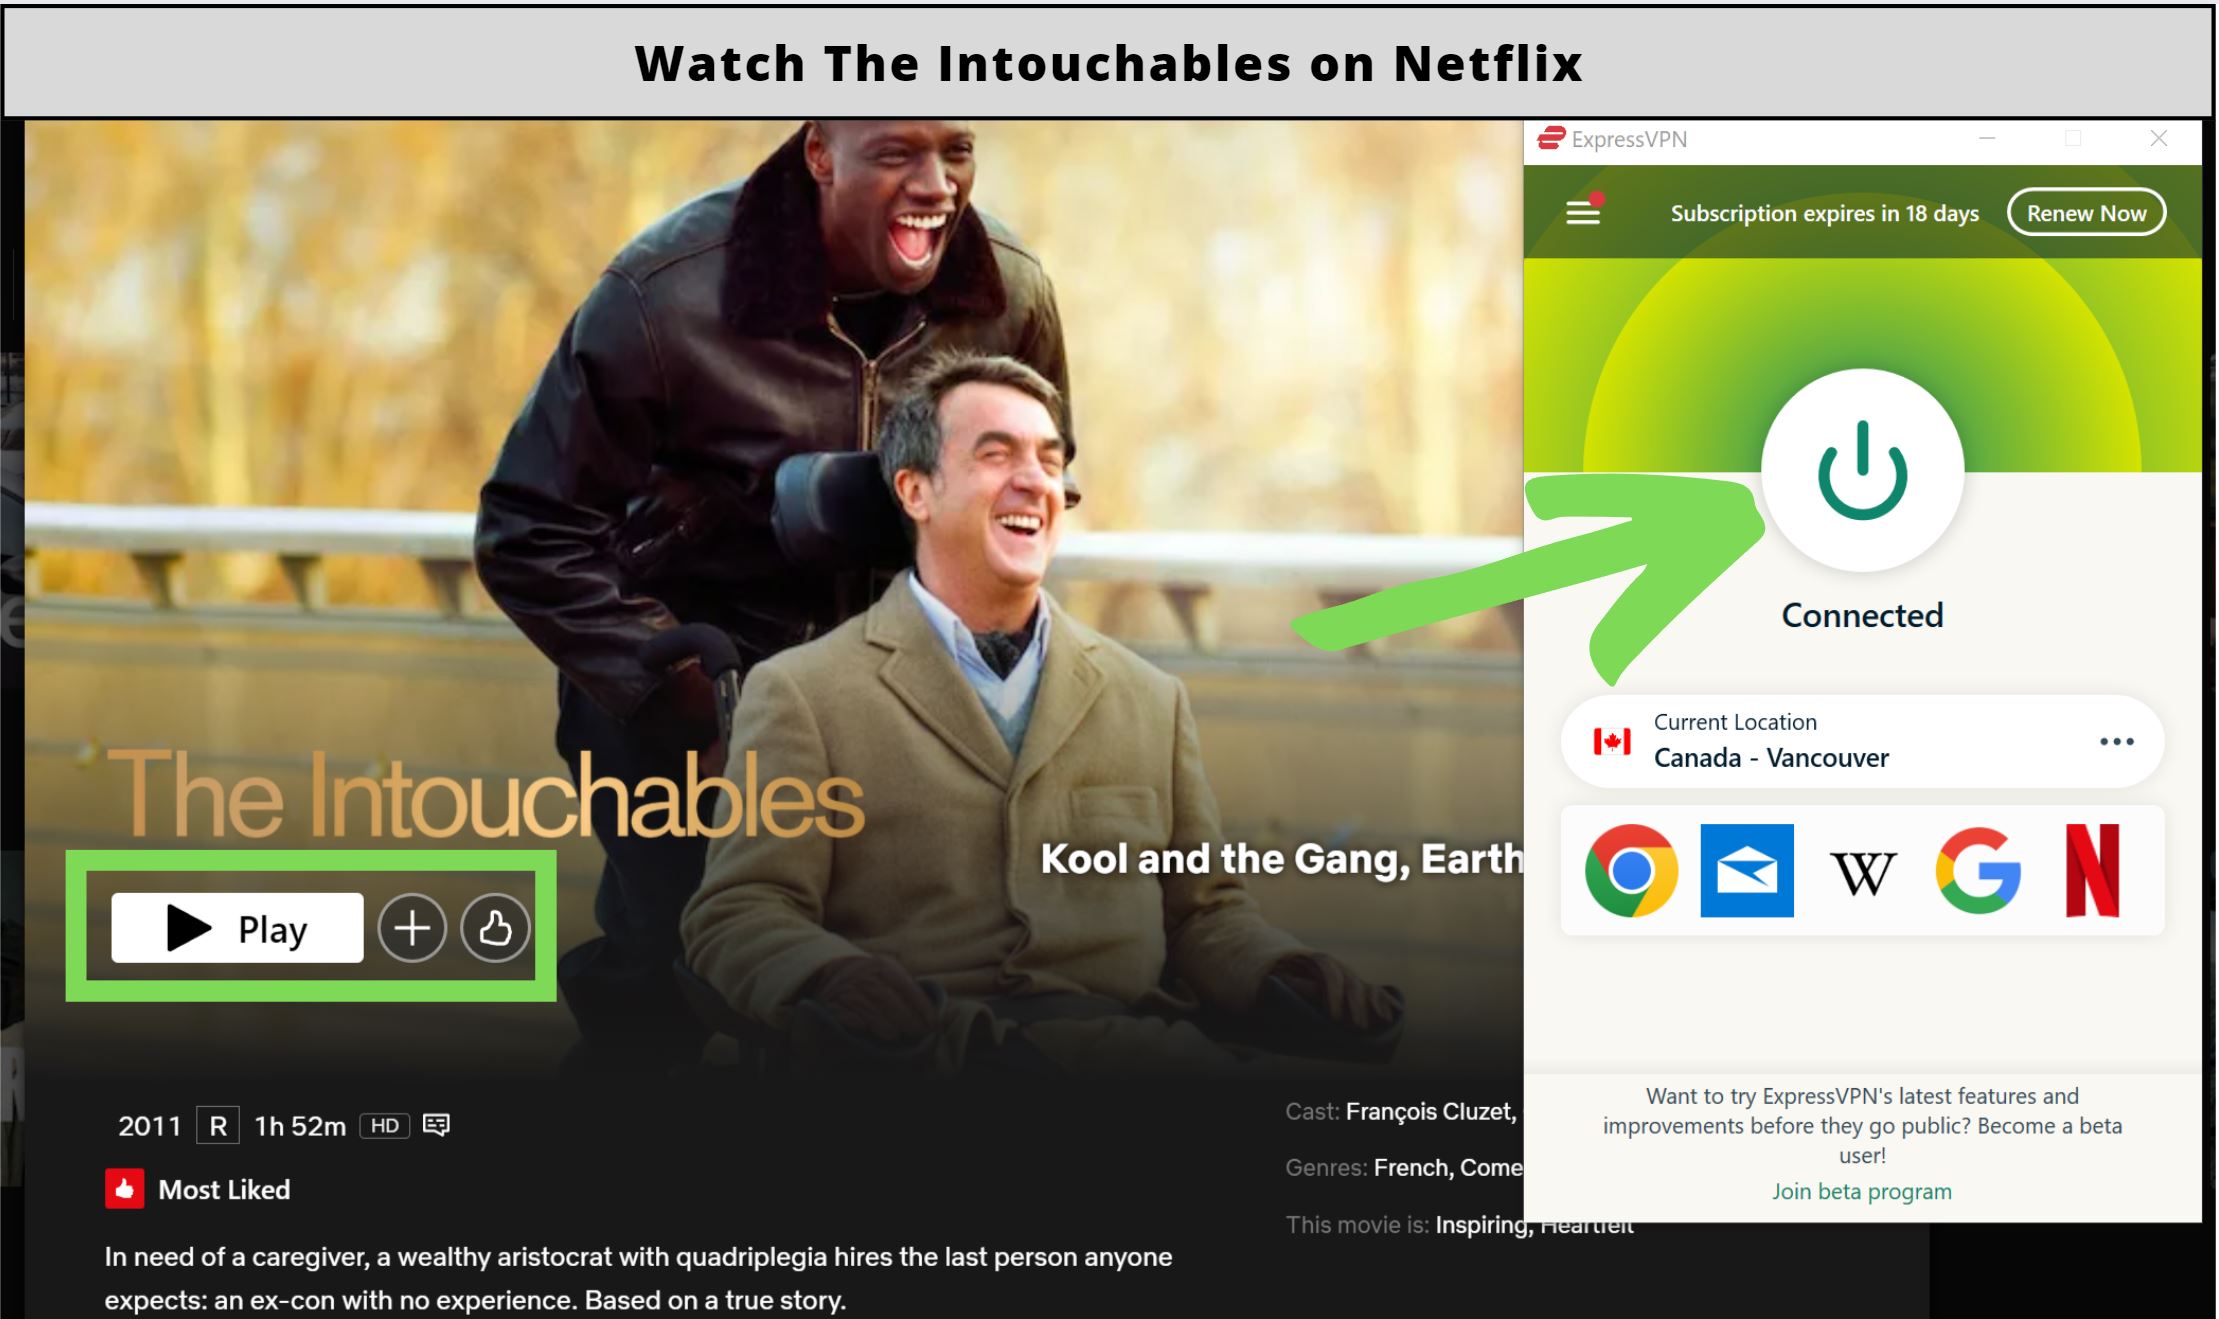 Is The Intouchables on Netflix in 2023?